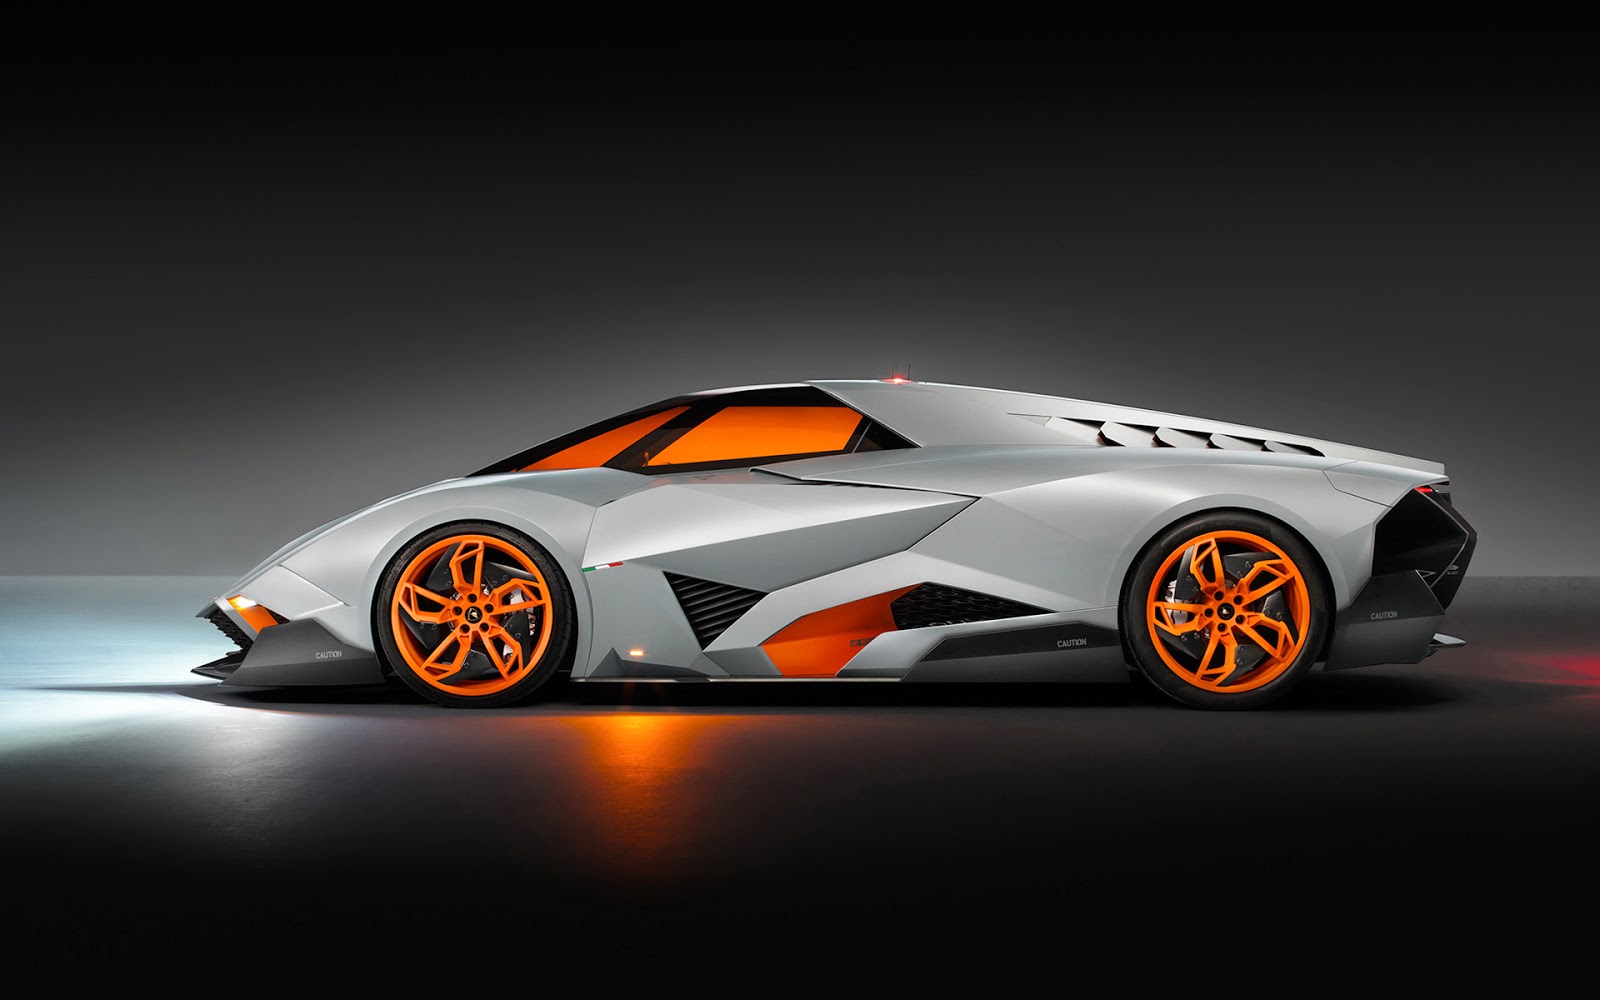  Car Wallpapers 2014 Iphone car fast cool cars sports cars